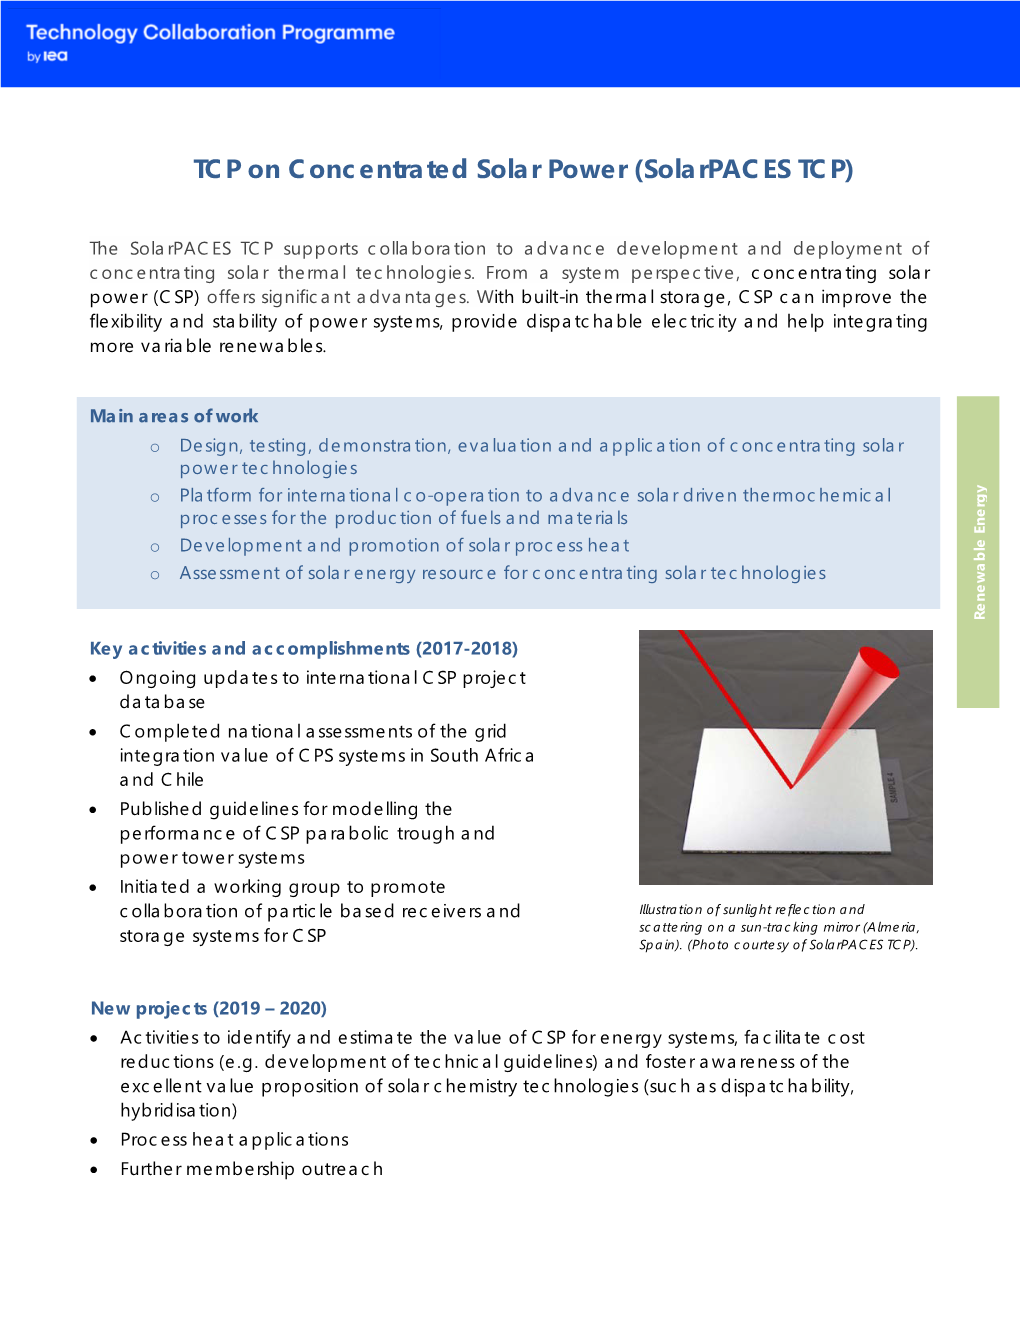 TCP on Concentrated Solar Power (Solarpaces TCP)